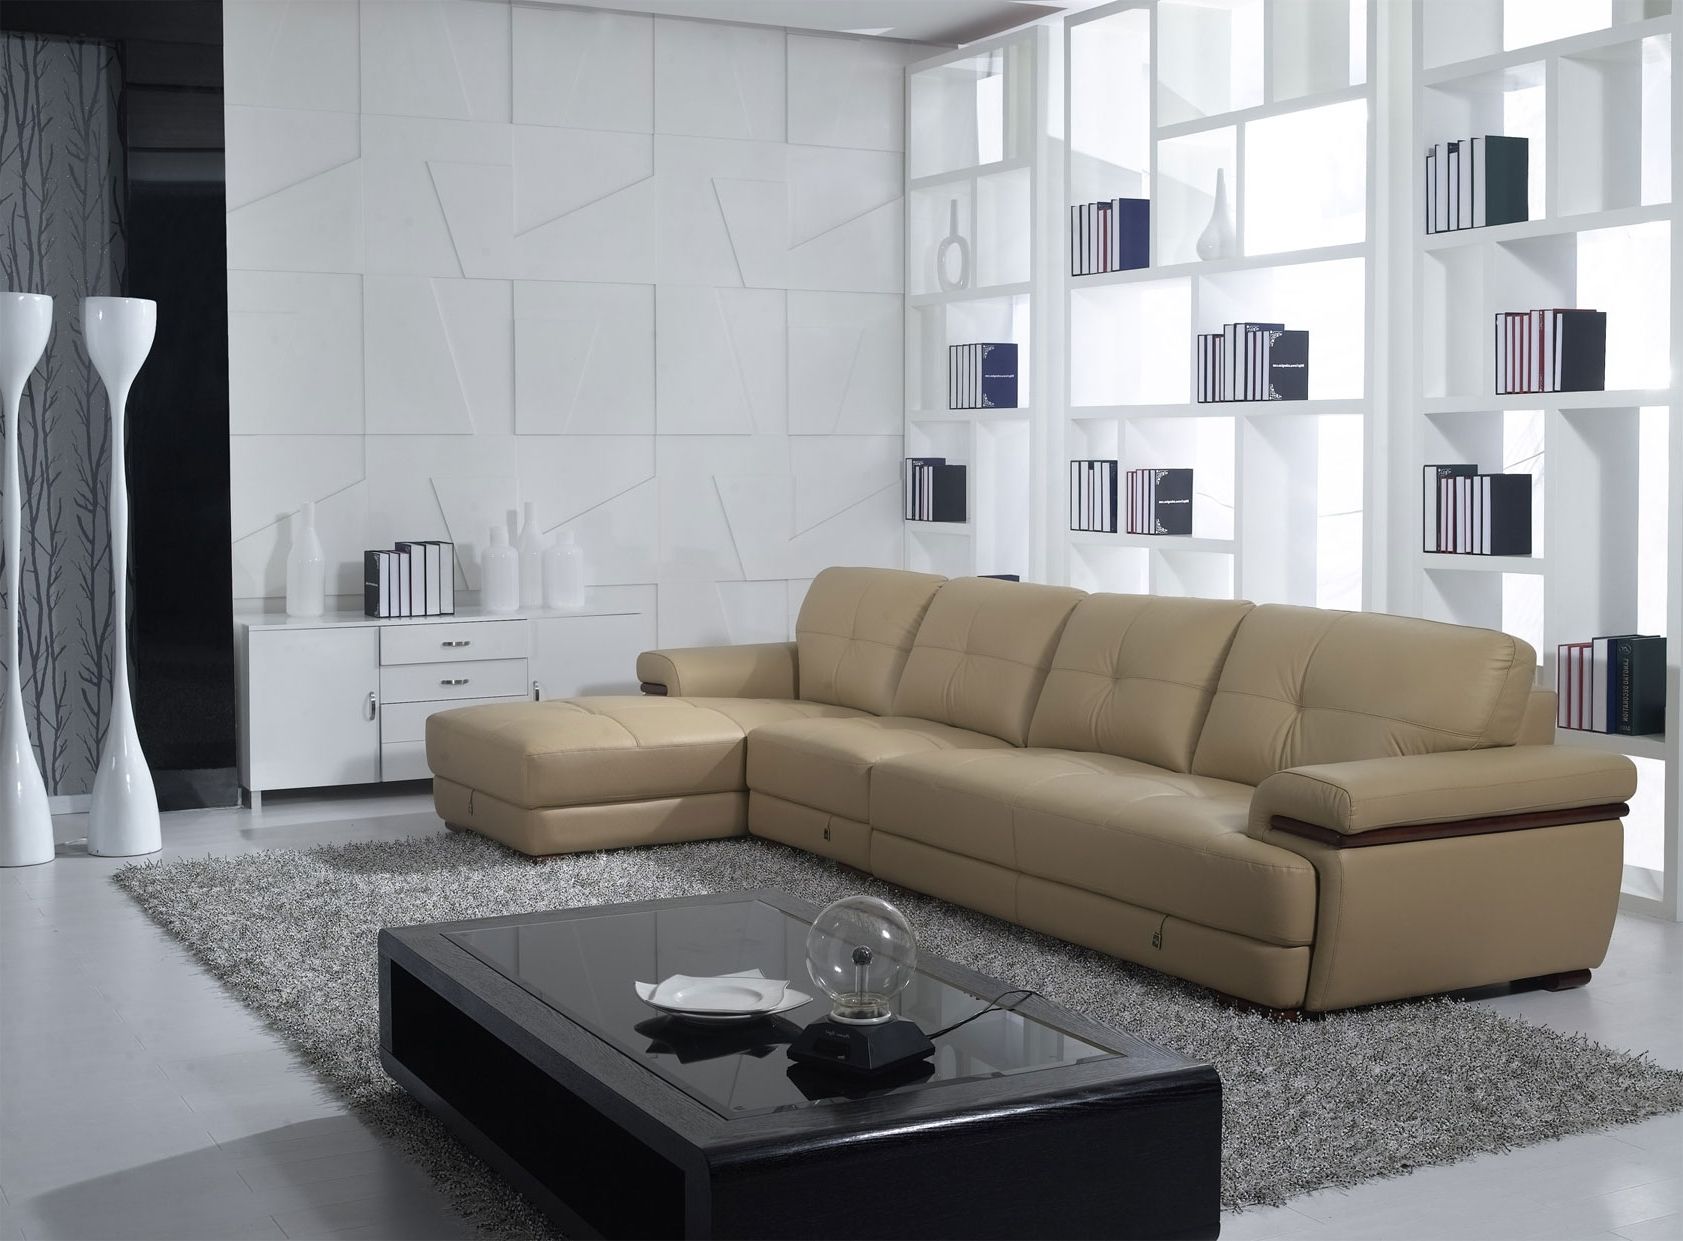 Good Quality Sectional Sofas Regarding Well Known Fancy Quality Sectional Sofas 15 Sofas And Couches Ideas With (View 2 of 20)